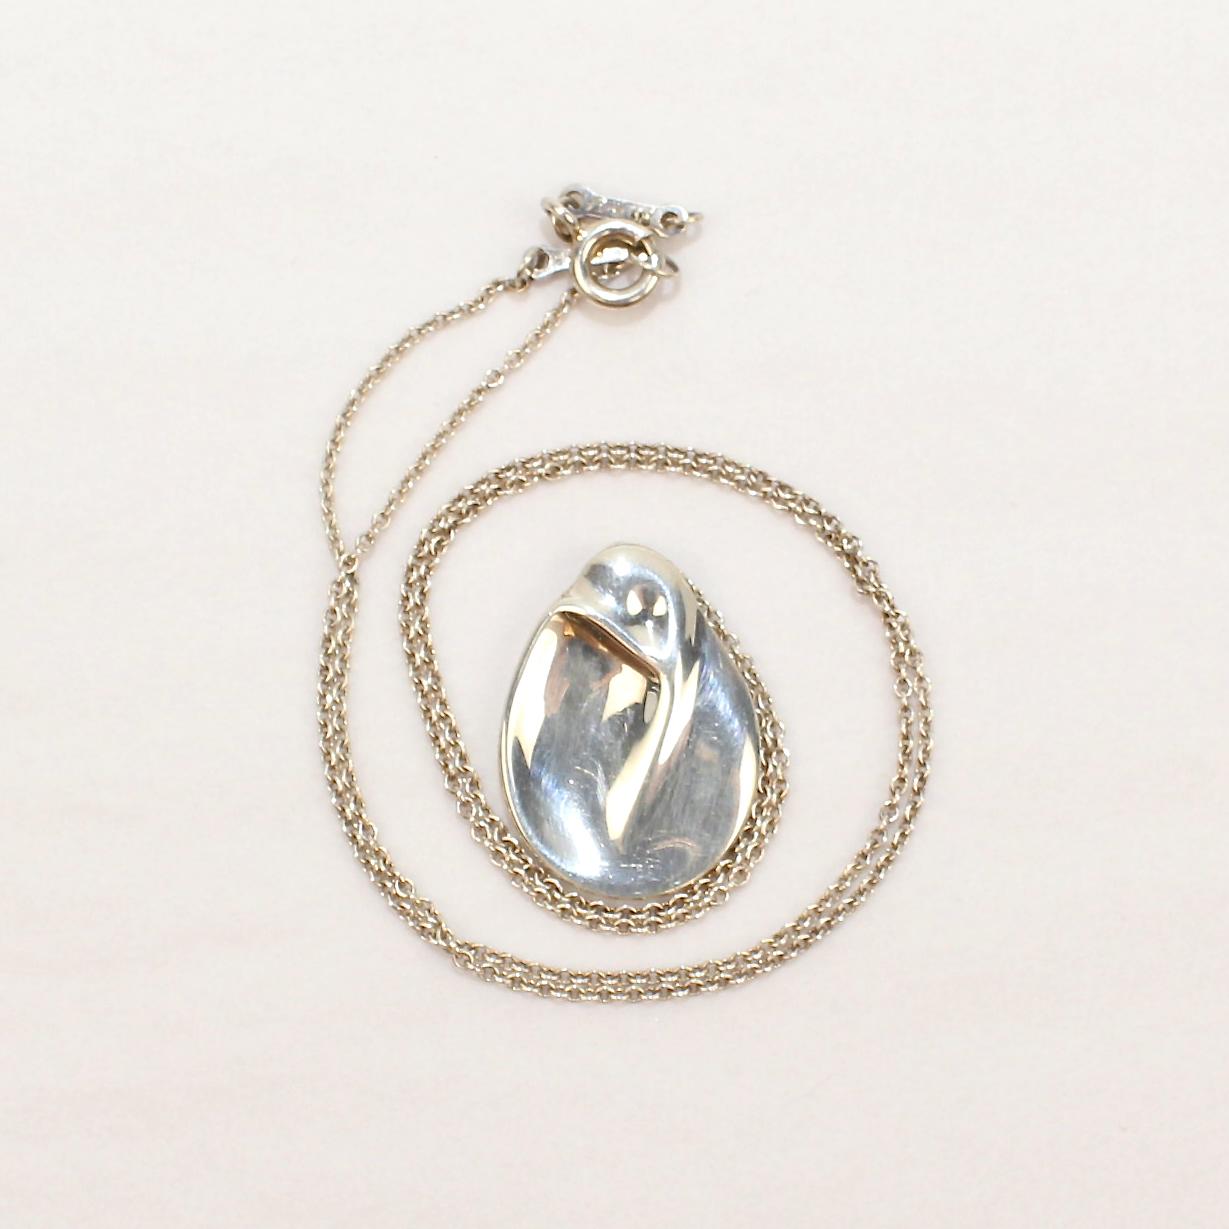 Modern Sterling Silver Madonna Pendant Necklace by Elsa Peretti for Tiffany & Co.